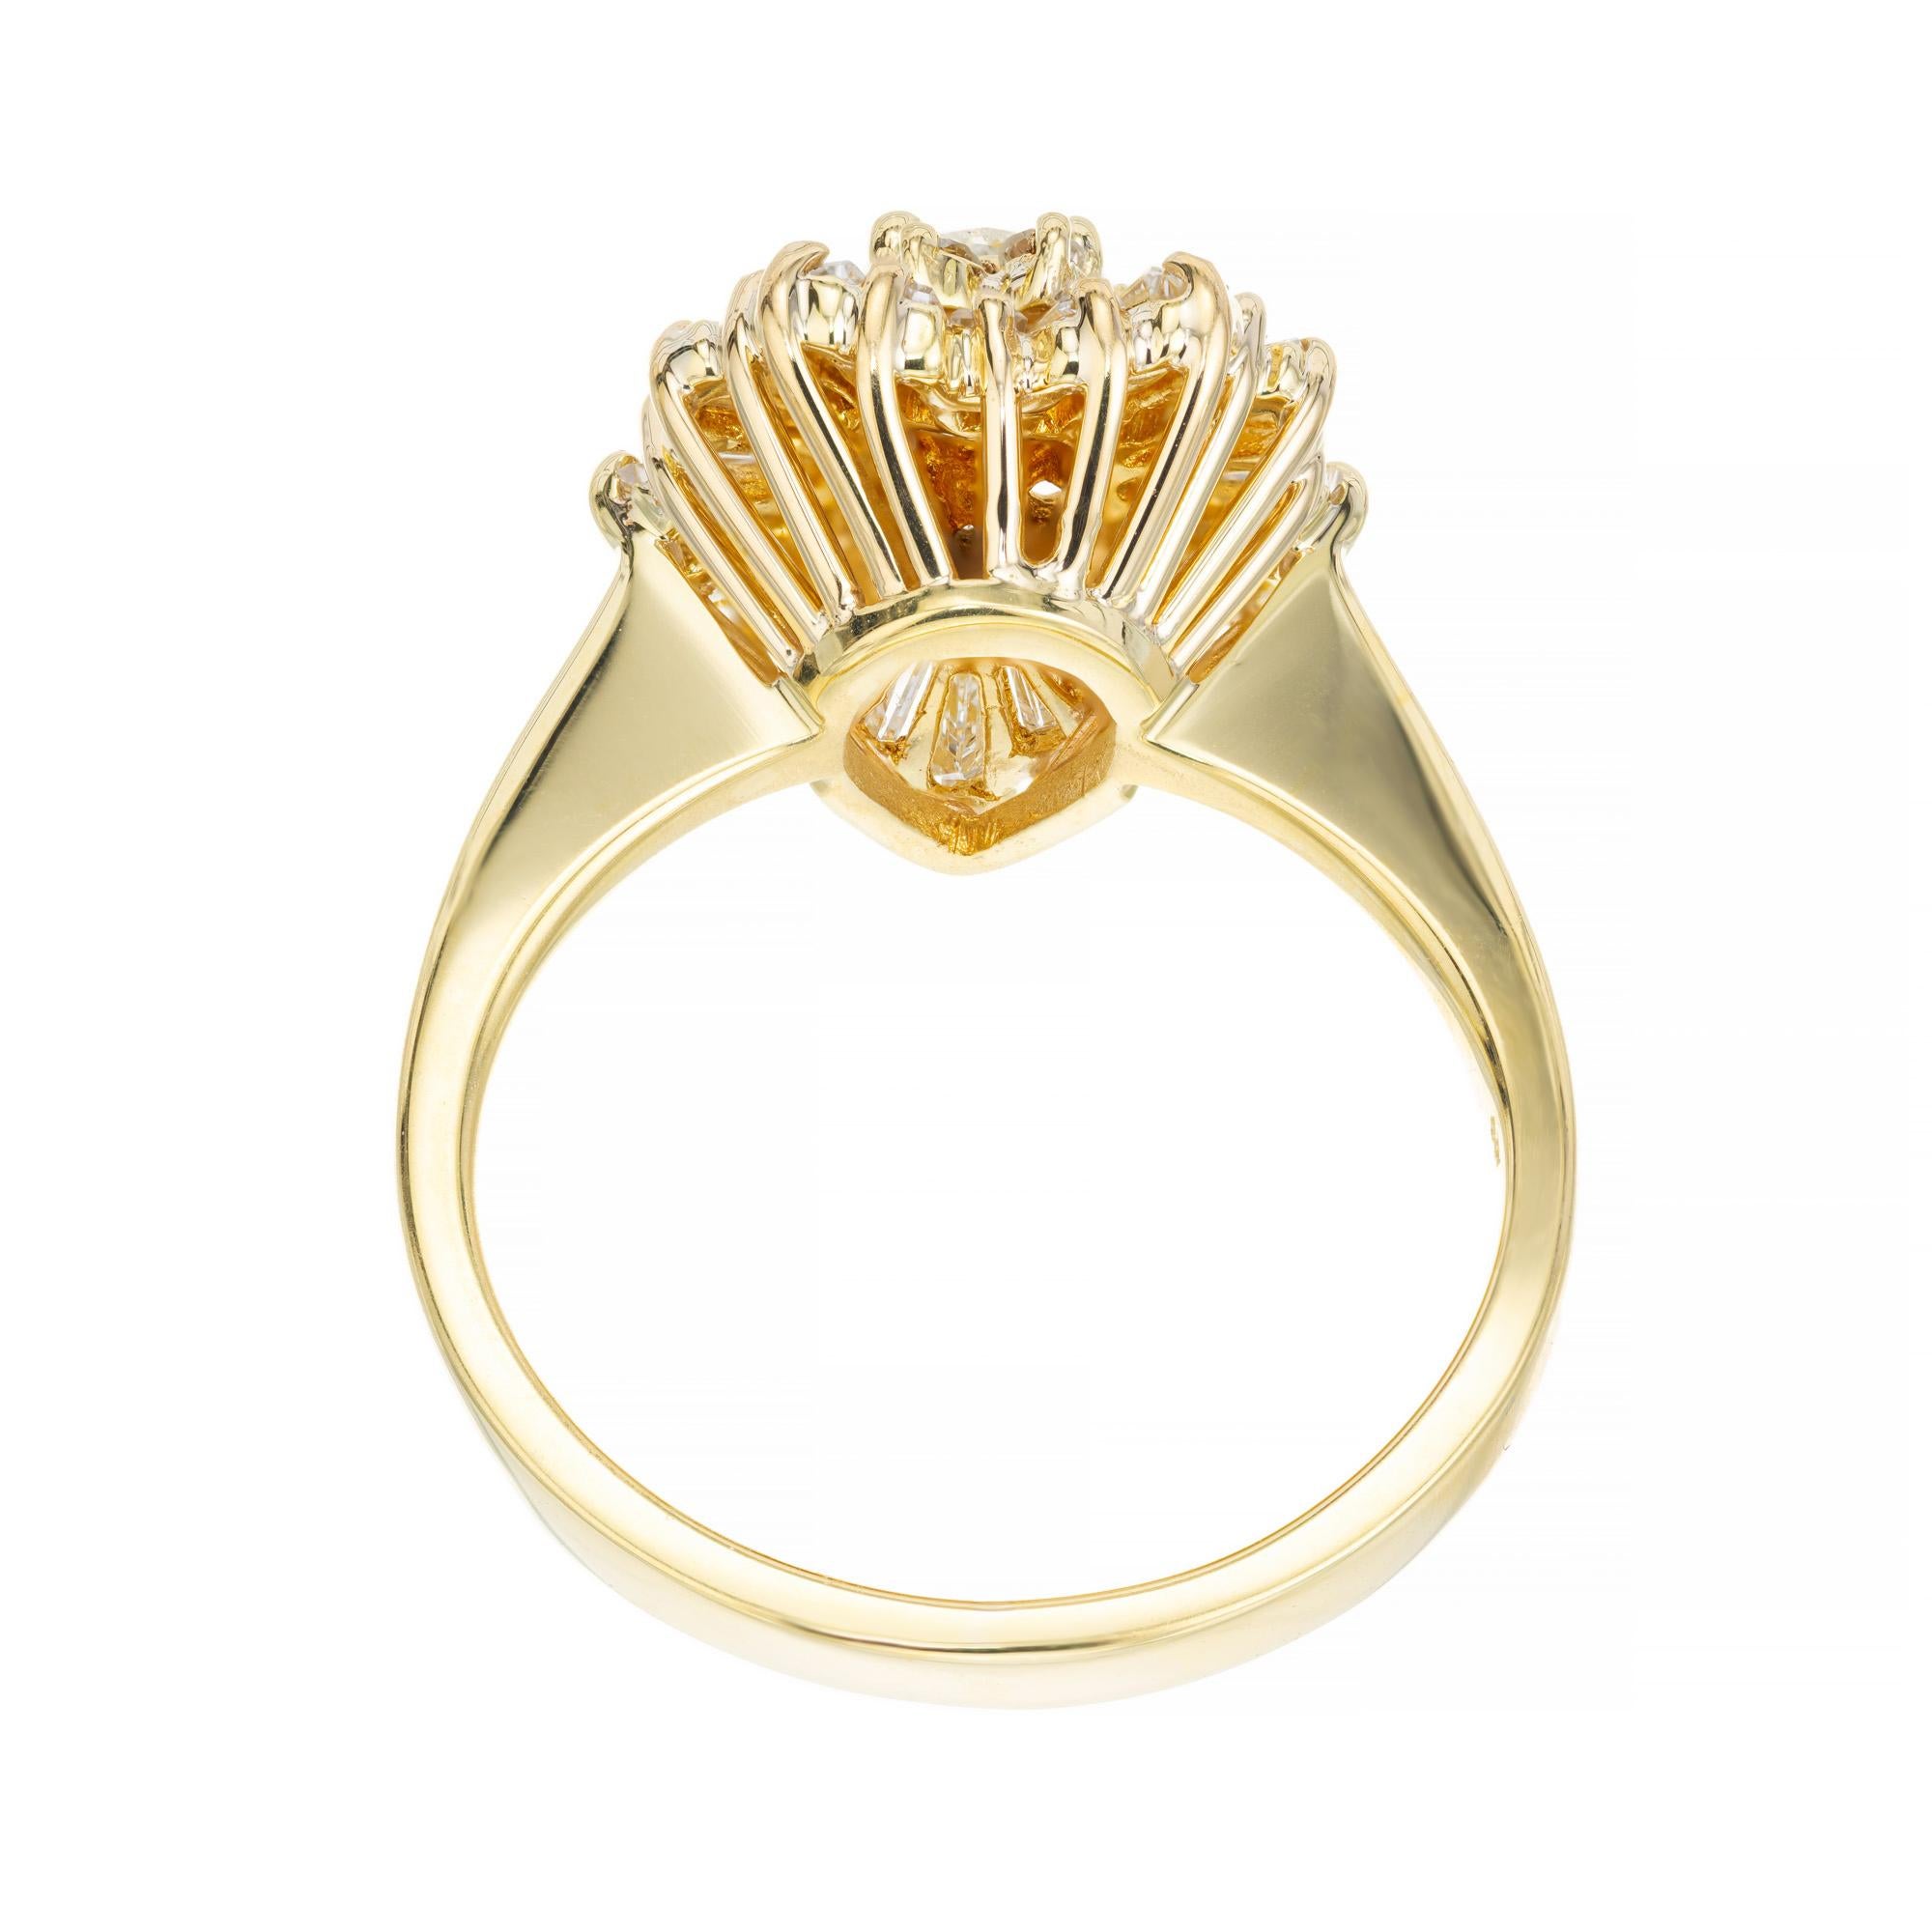 1.63 Carat Pear Shaped Diamond Halo Yellow Gold Ballerina Engagement Ring  In Good Condition For Sale In Stamford, CT